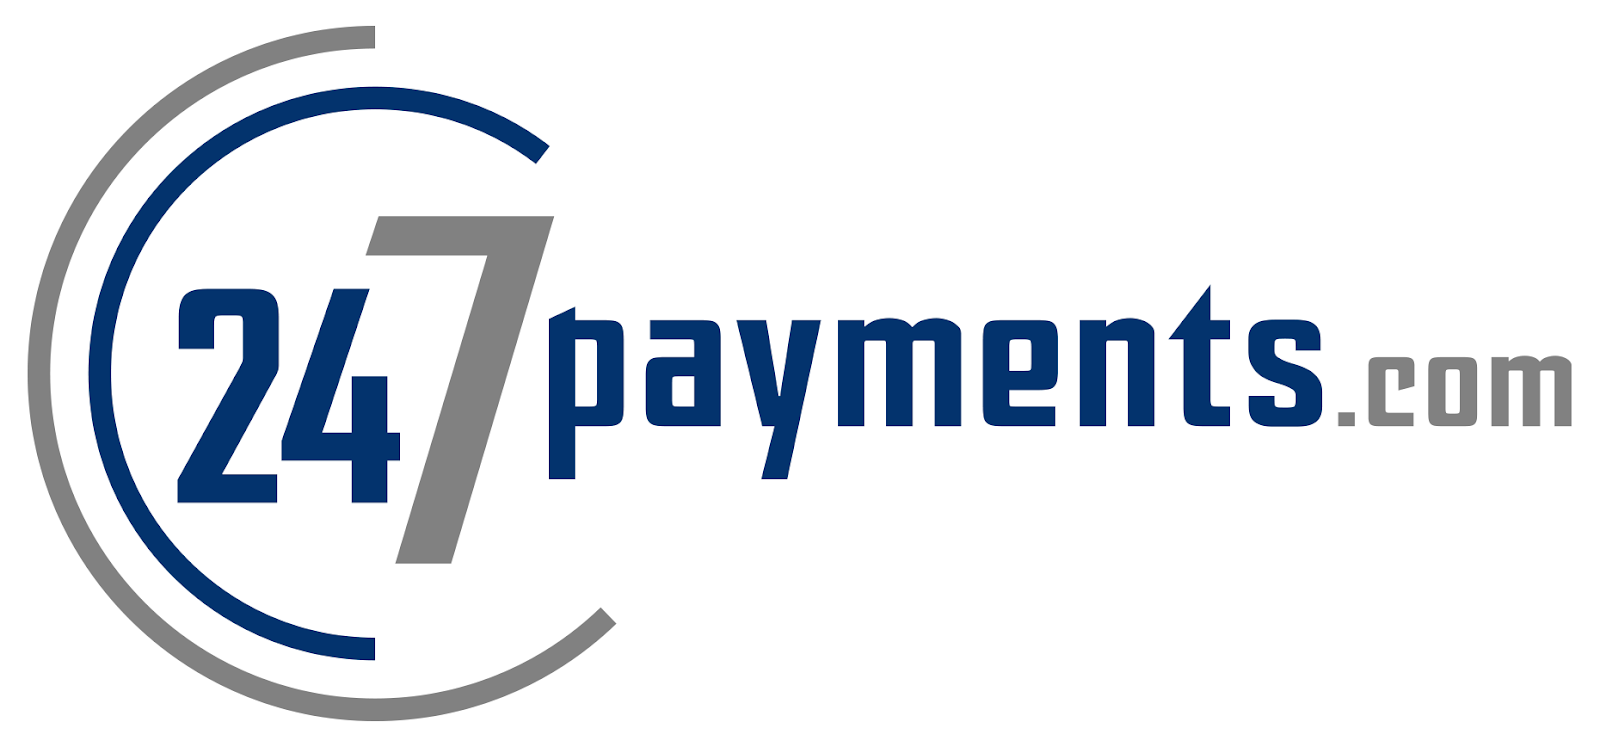 247 Payments logo (1).png